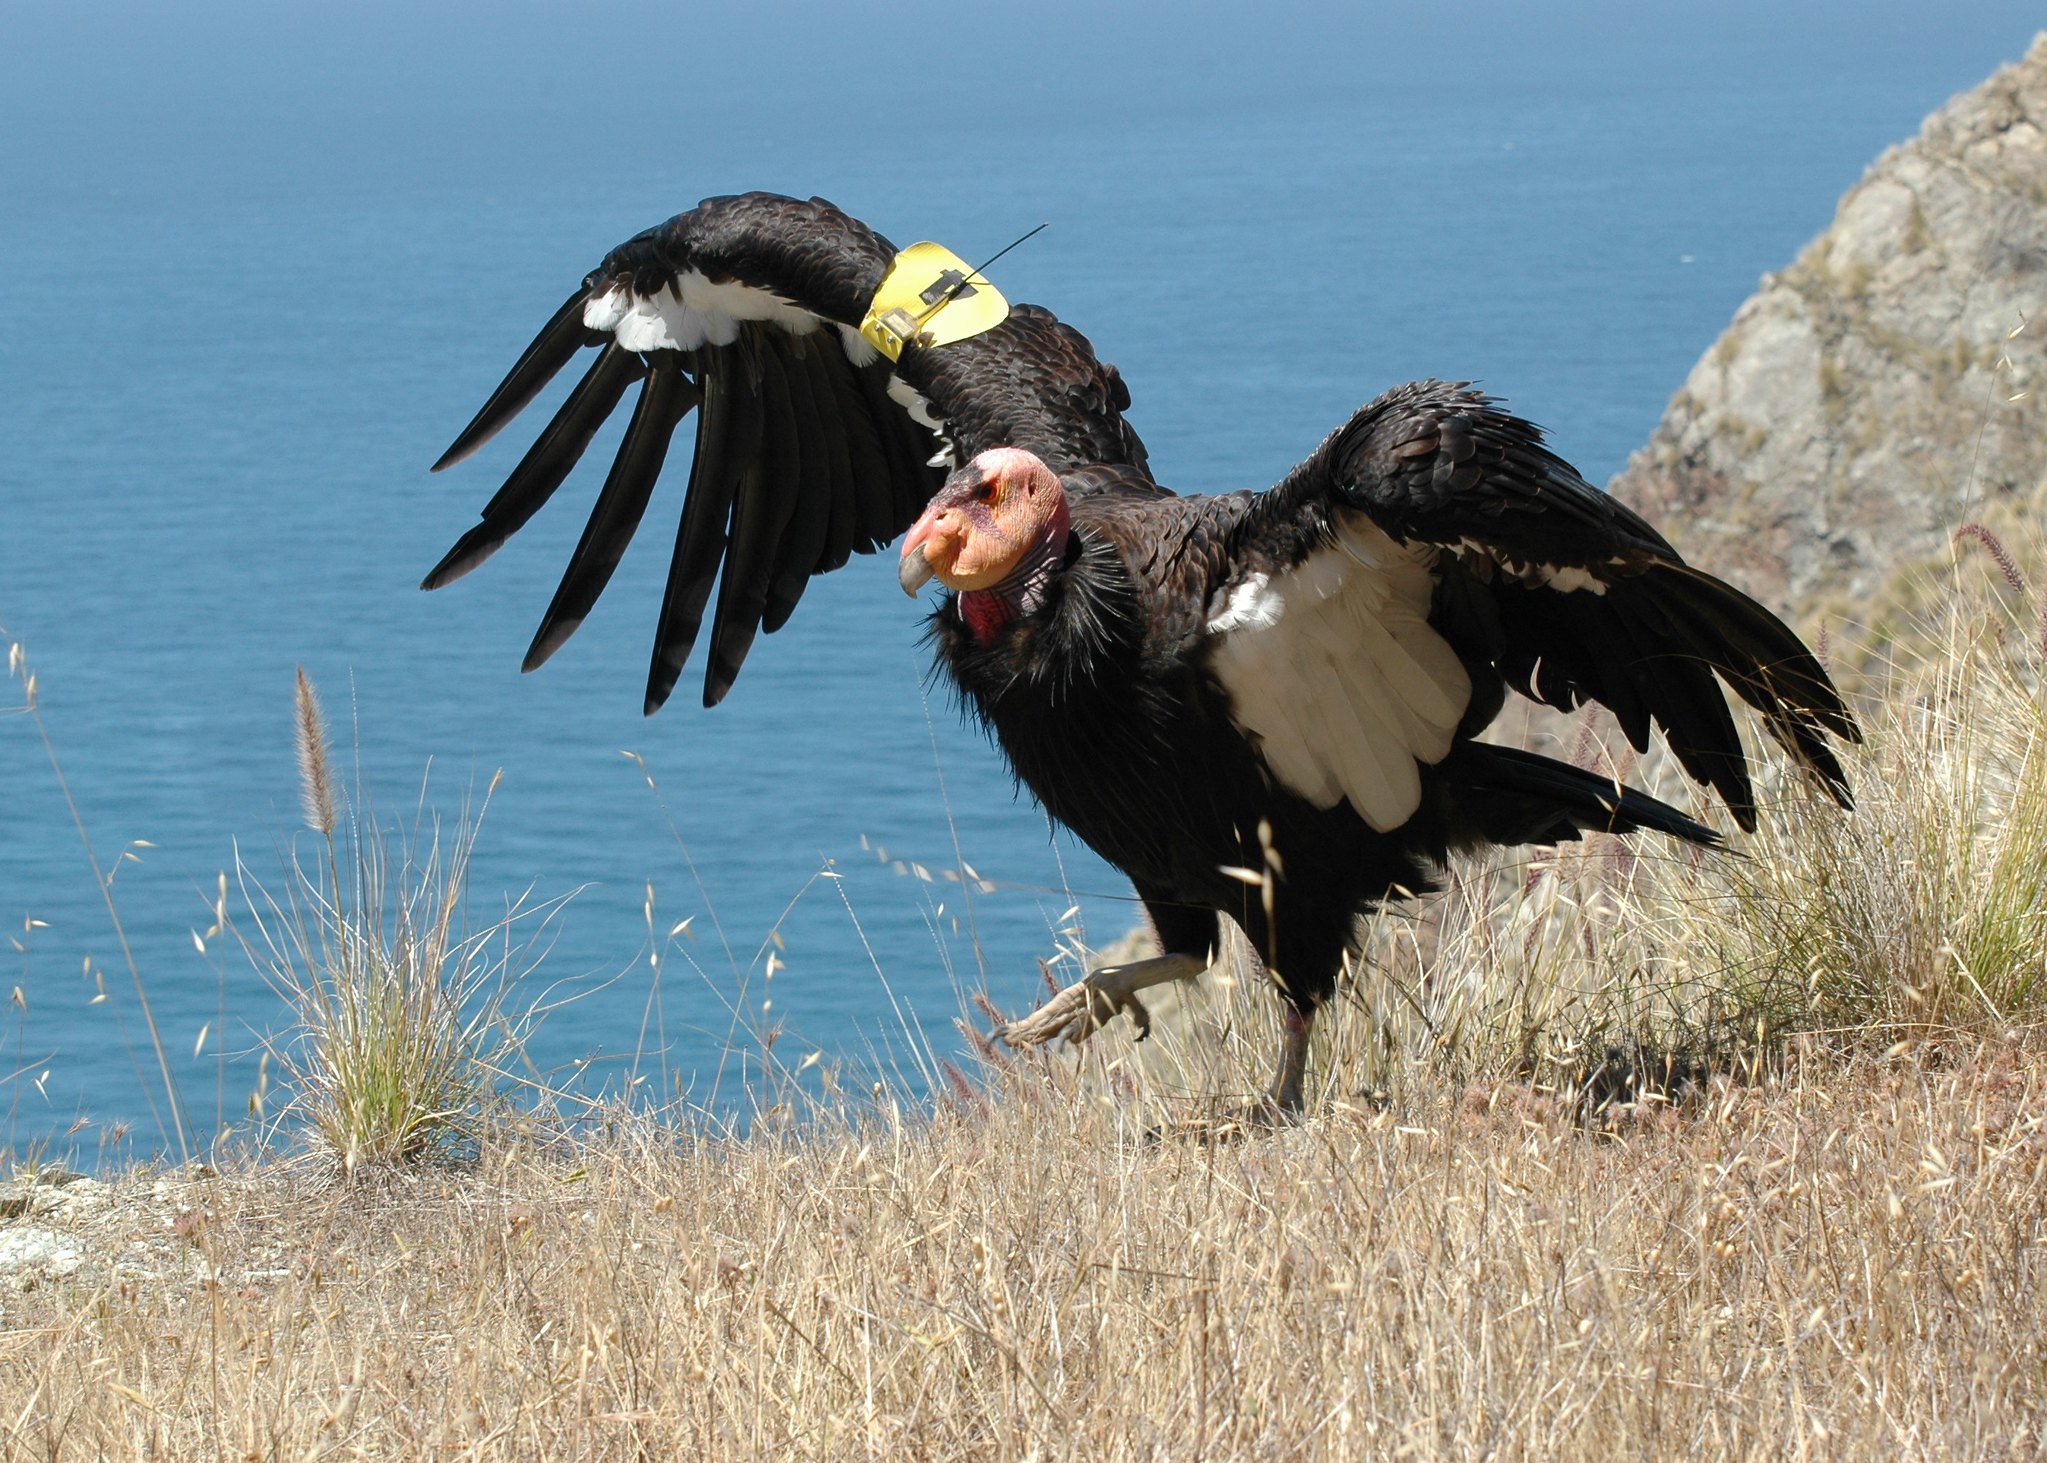 A California condor basking in the sun with its wings spread out